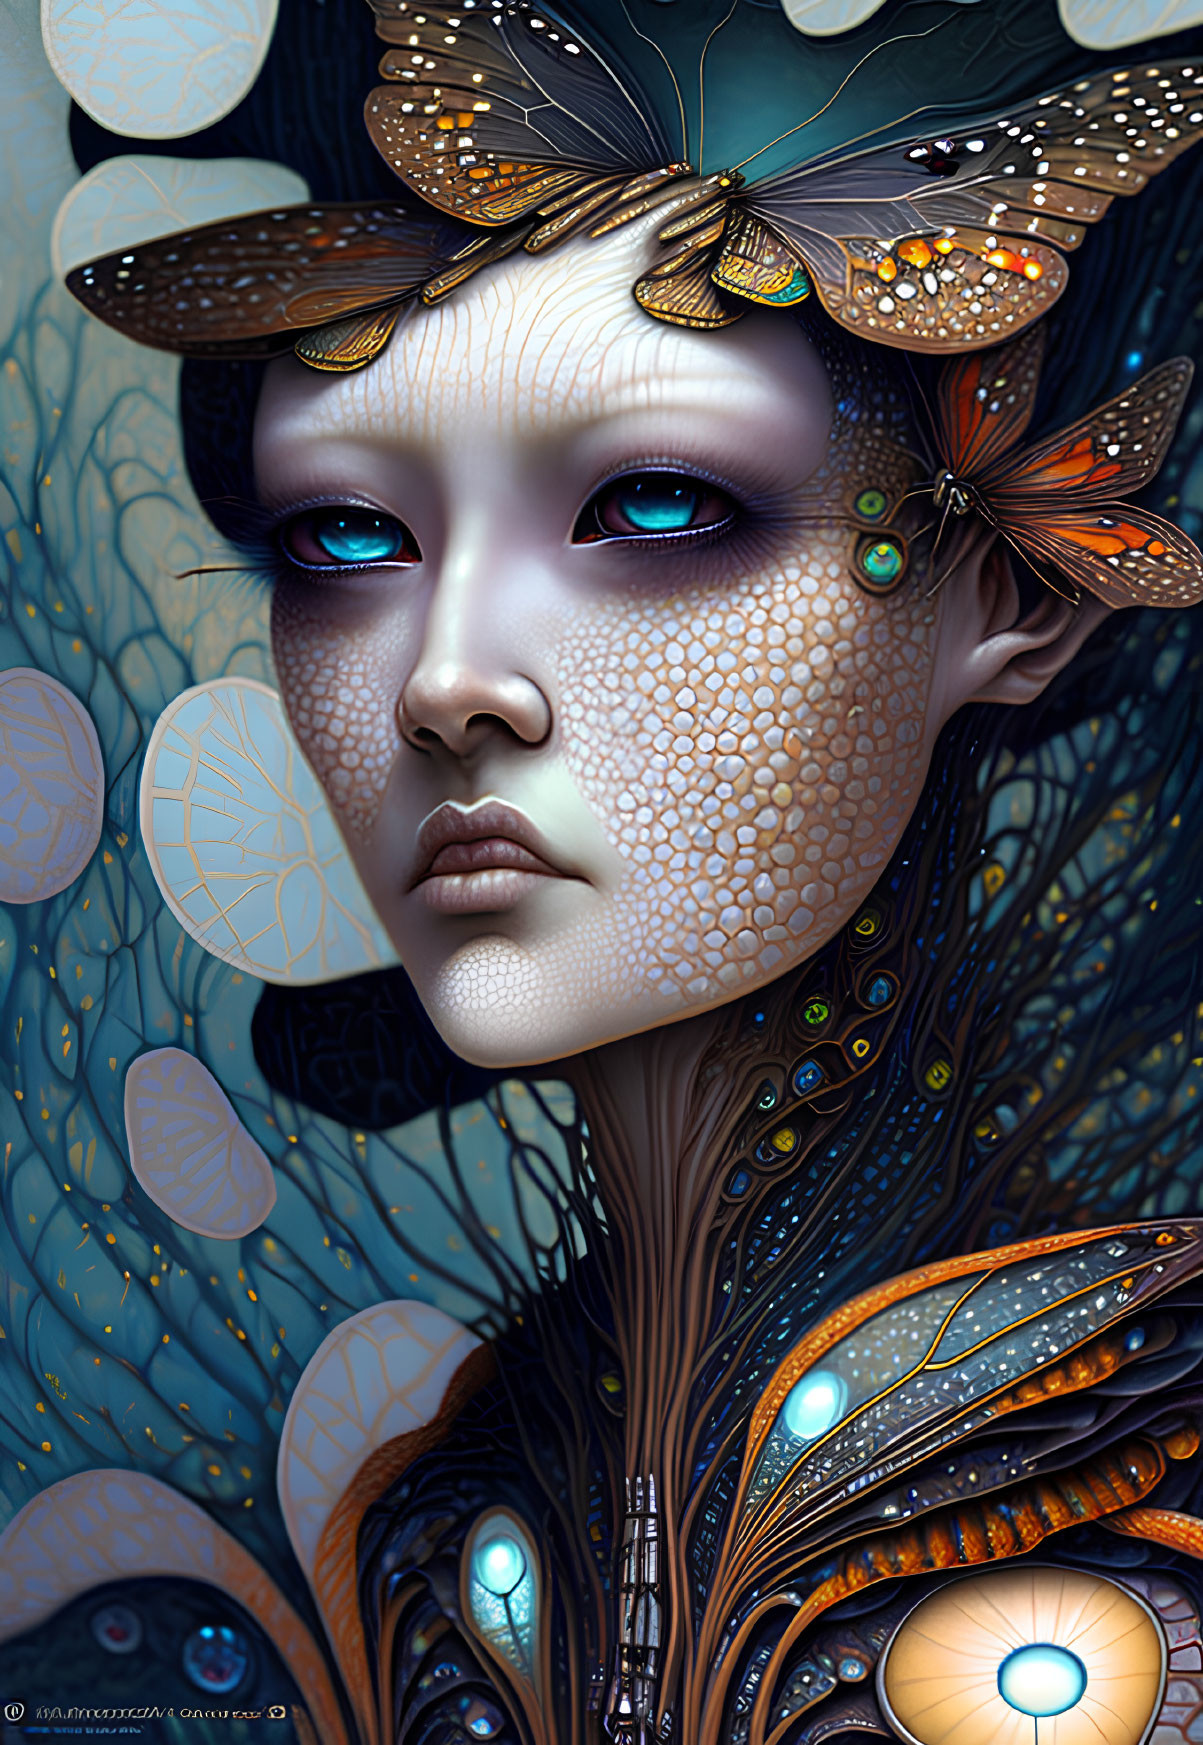 Detailed portrait of person with butterfly motifs, iridescent eyes, and patterned skin merging with wings